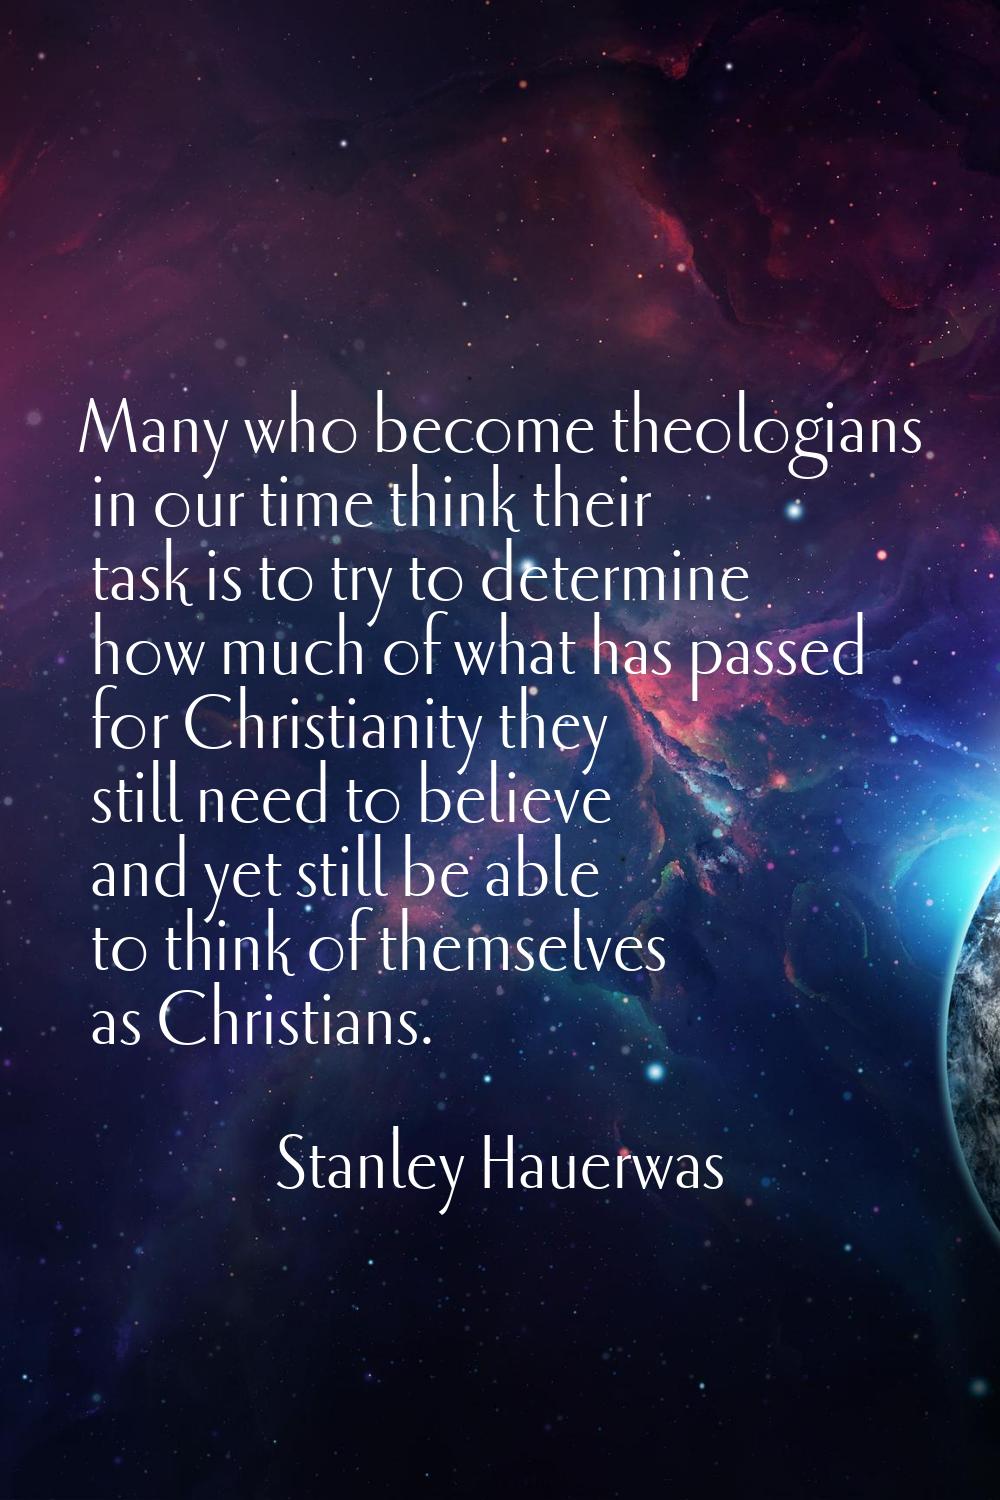 Many who become theologians in our time think their task is to try to determine how much of what ha